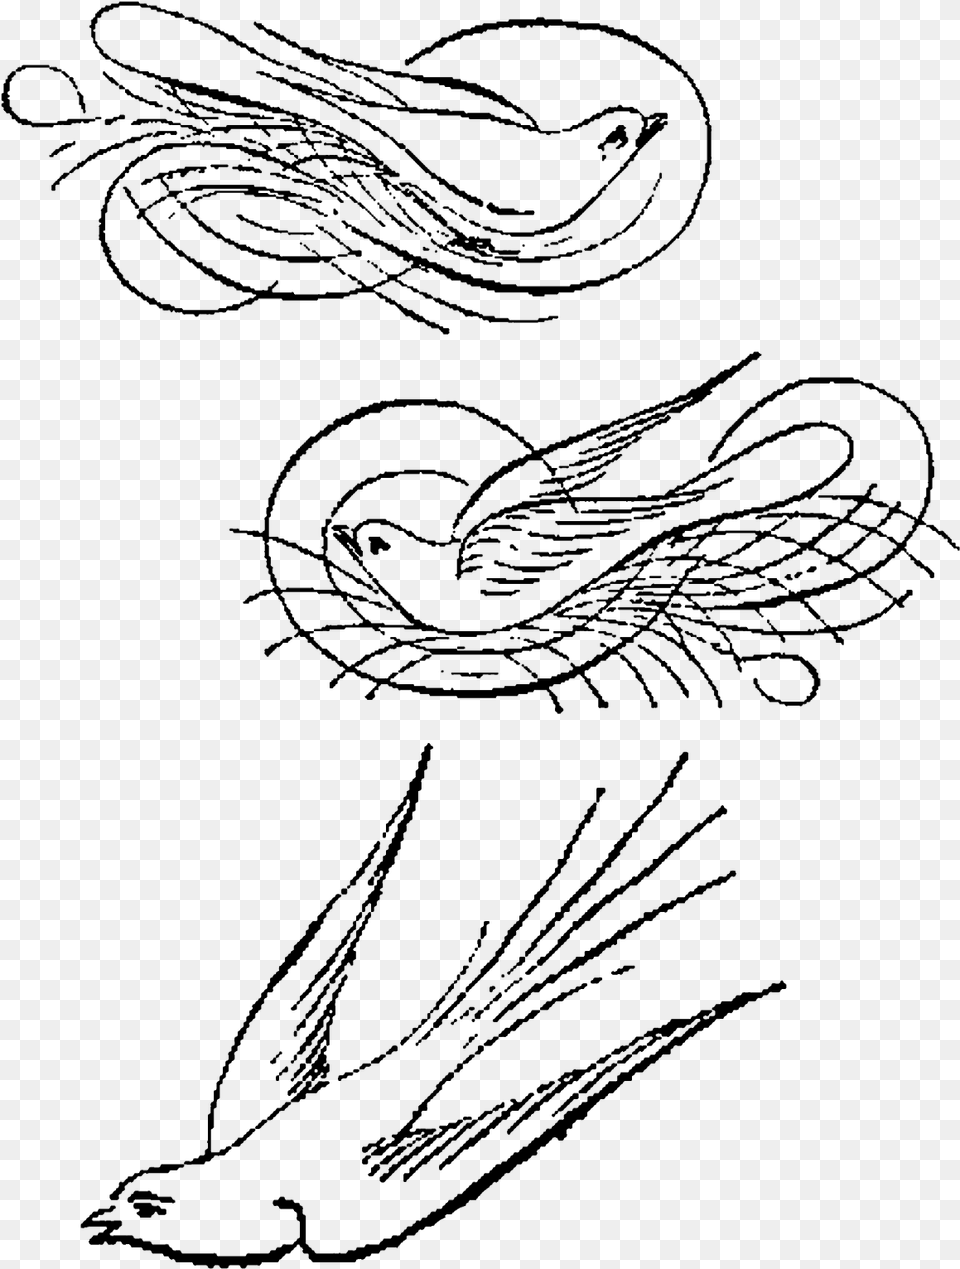 Birds Calligraphy Artwork Drawings Illustrations Downloads Line Art, Gray Free Transparent Png